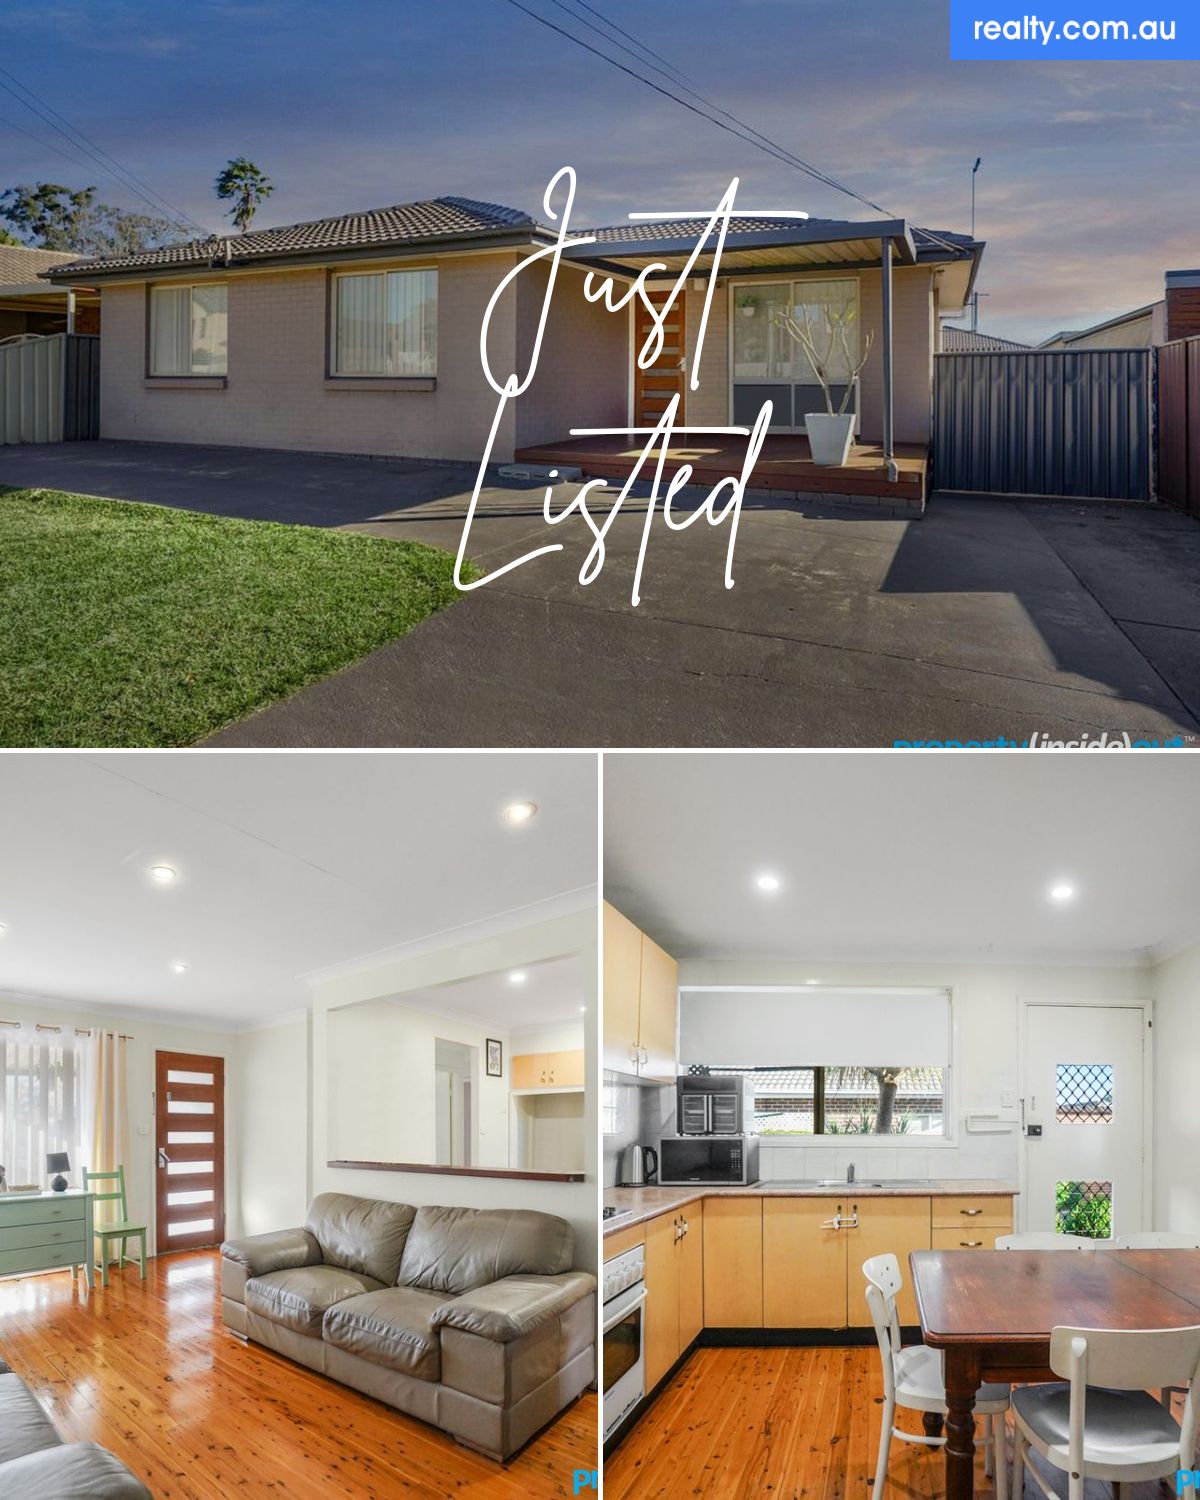 20 & 20A Beatrice Street, Rooty Hill, NSW 2766 | Realty.com.au